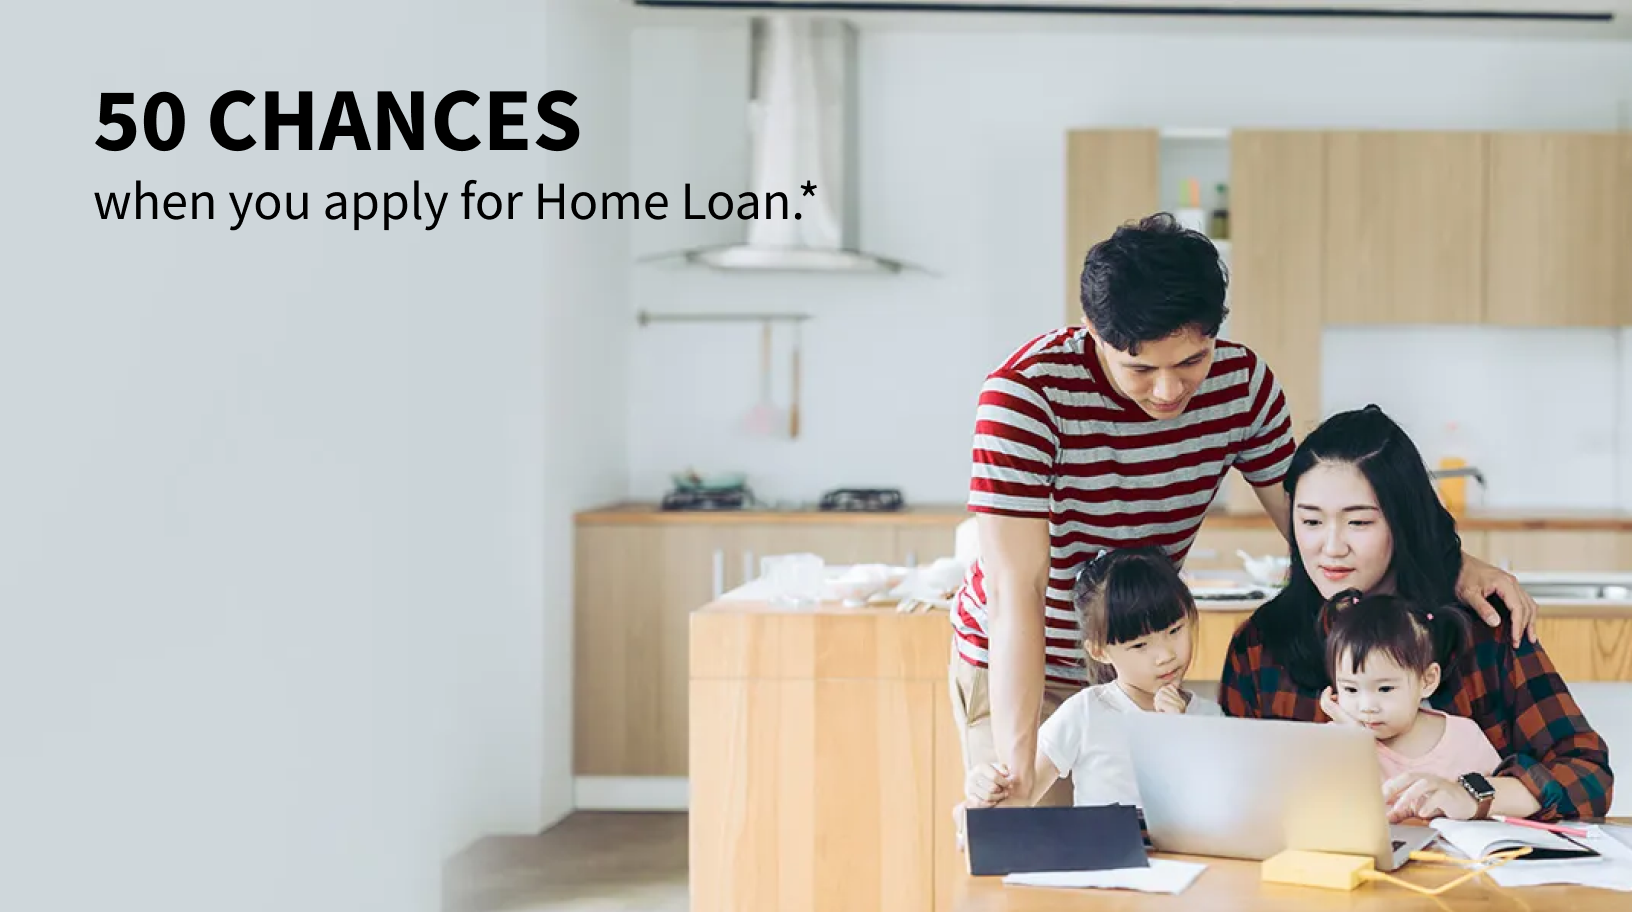 DBS Home Loan: Get up to S$4,199 worth of cash or Dyson gifts when you apply!